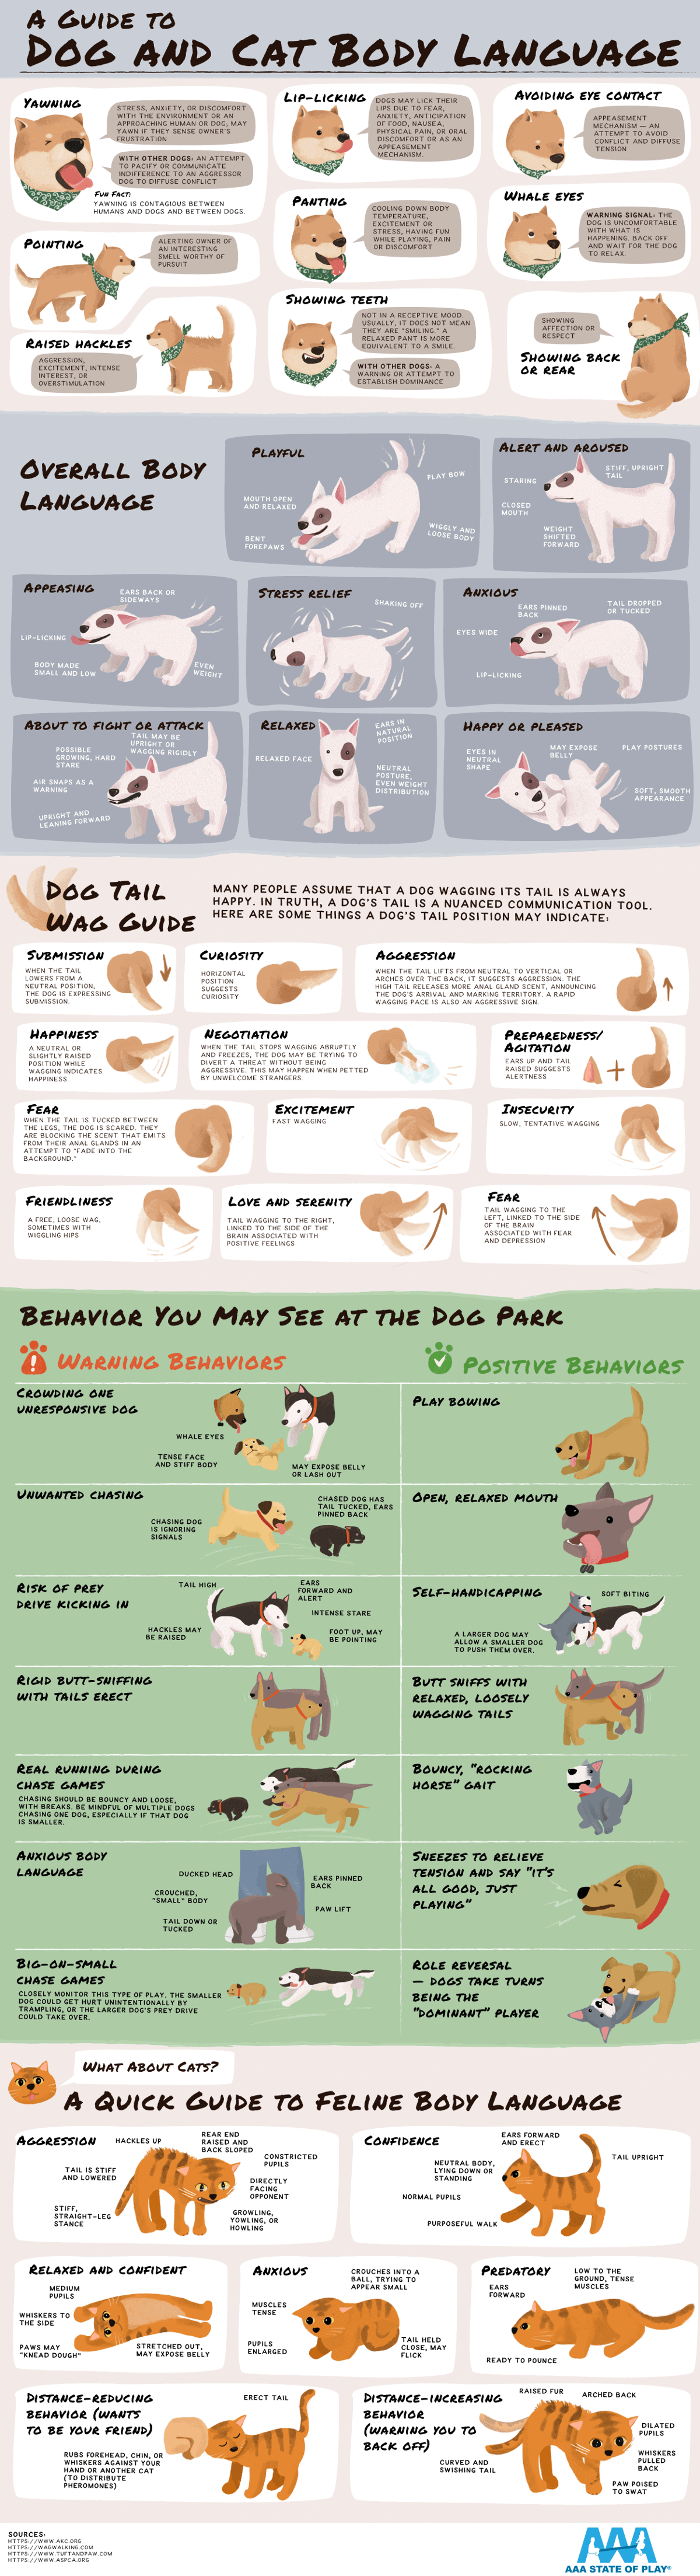 The Ultimate Guide to Cat and Dog Body Language